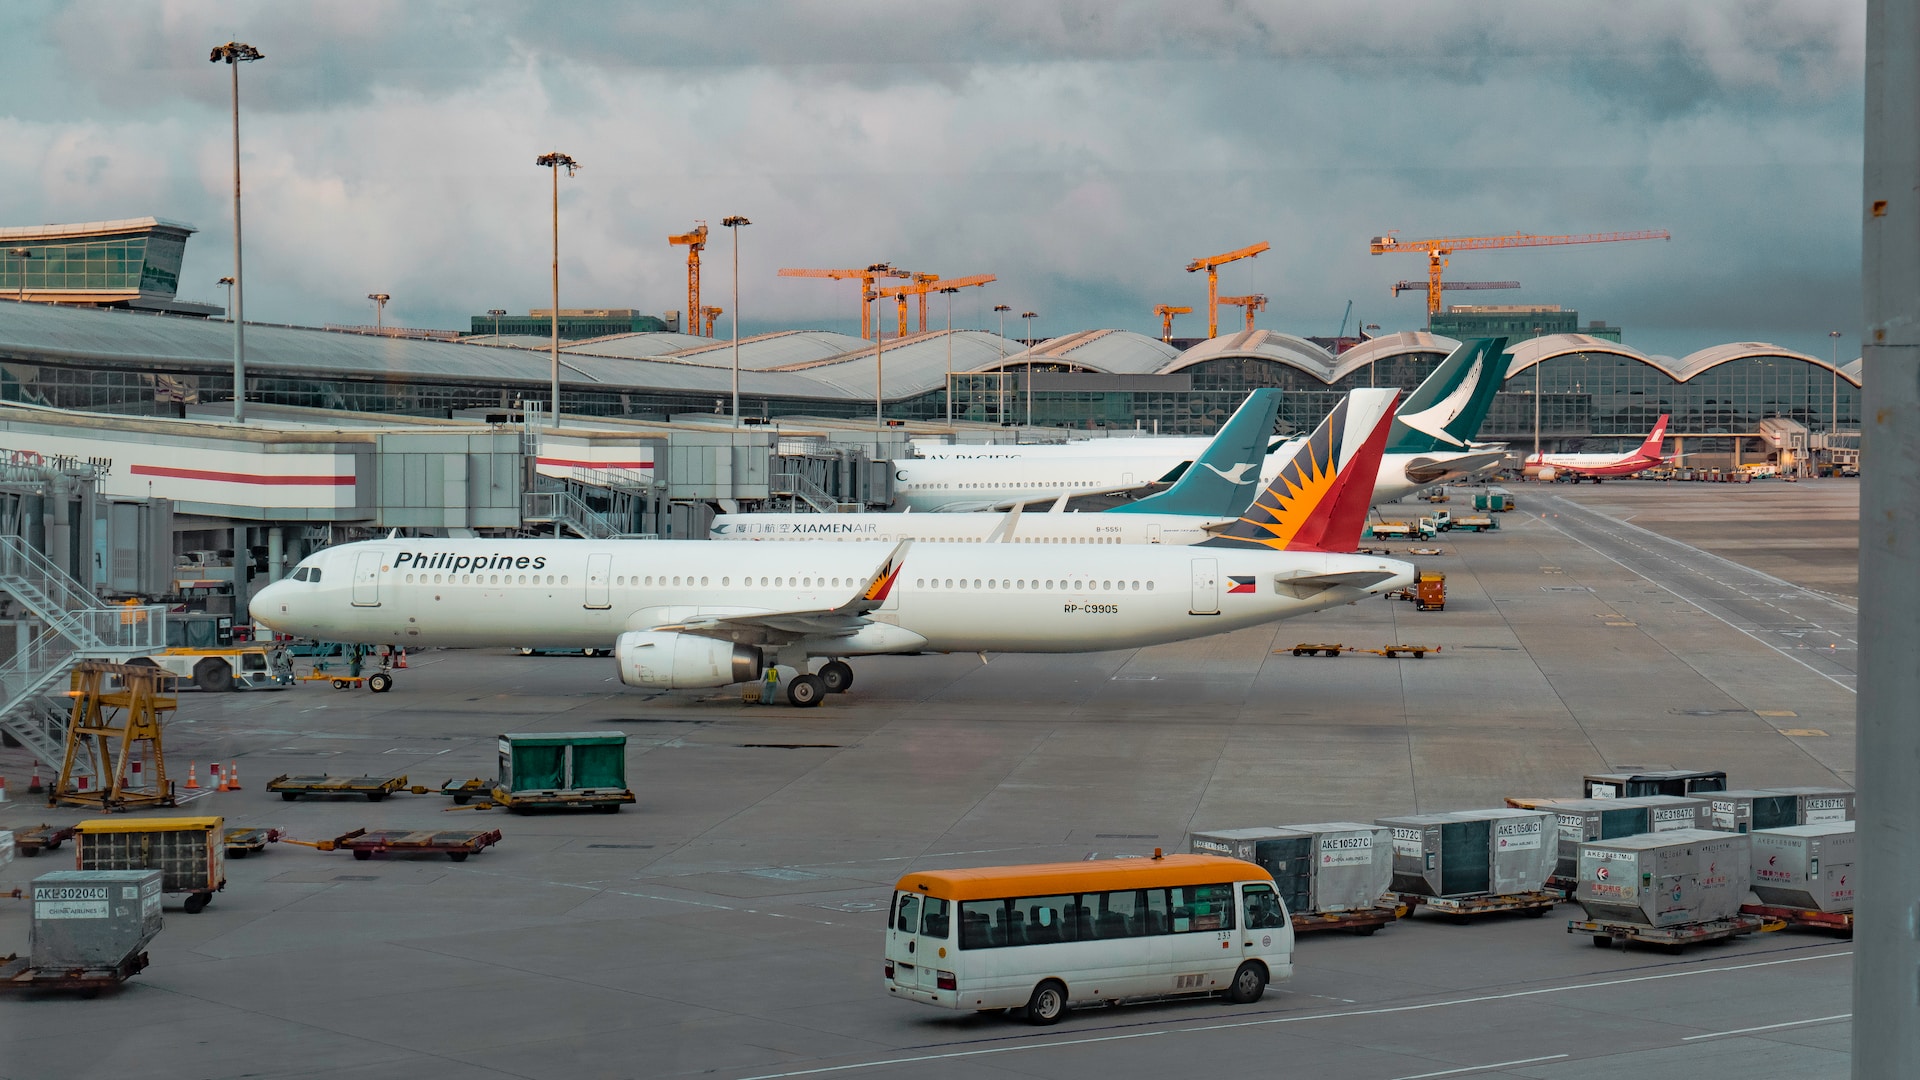 Philippine Airlines on the tarmac